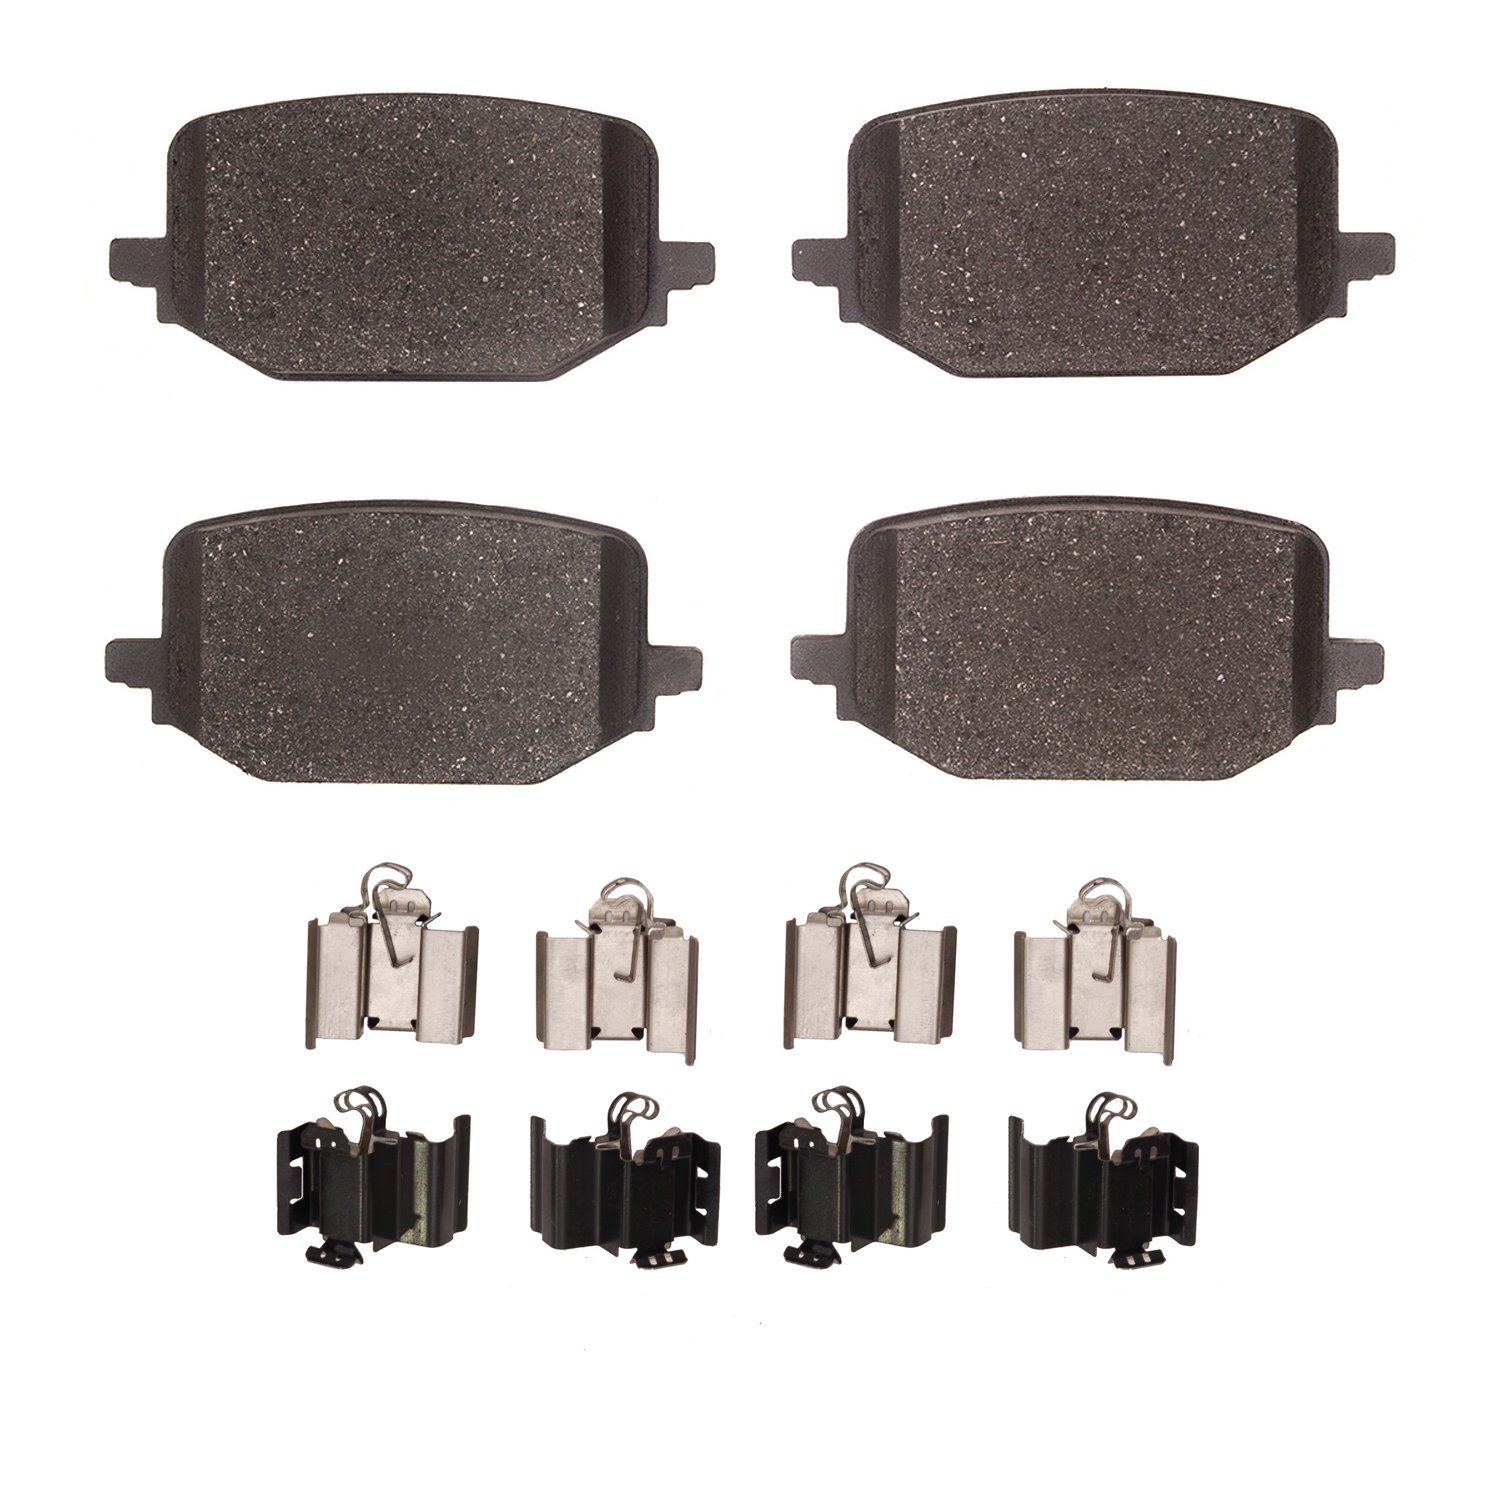 1552-2231-01 5000 Advanced Low-Metallic Brake Pads & Hardware Kit, Fits Select Ford/Lincoln/Mercury/Mazda, Position: Rear